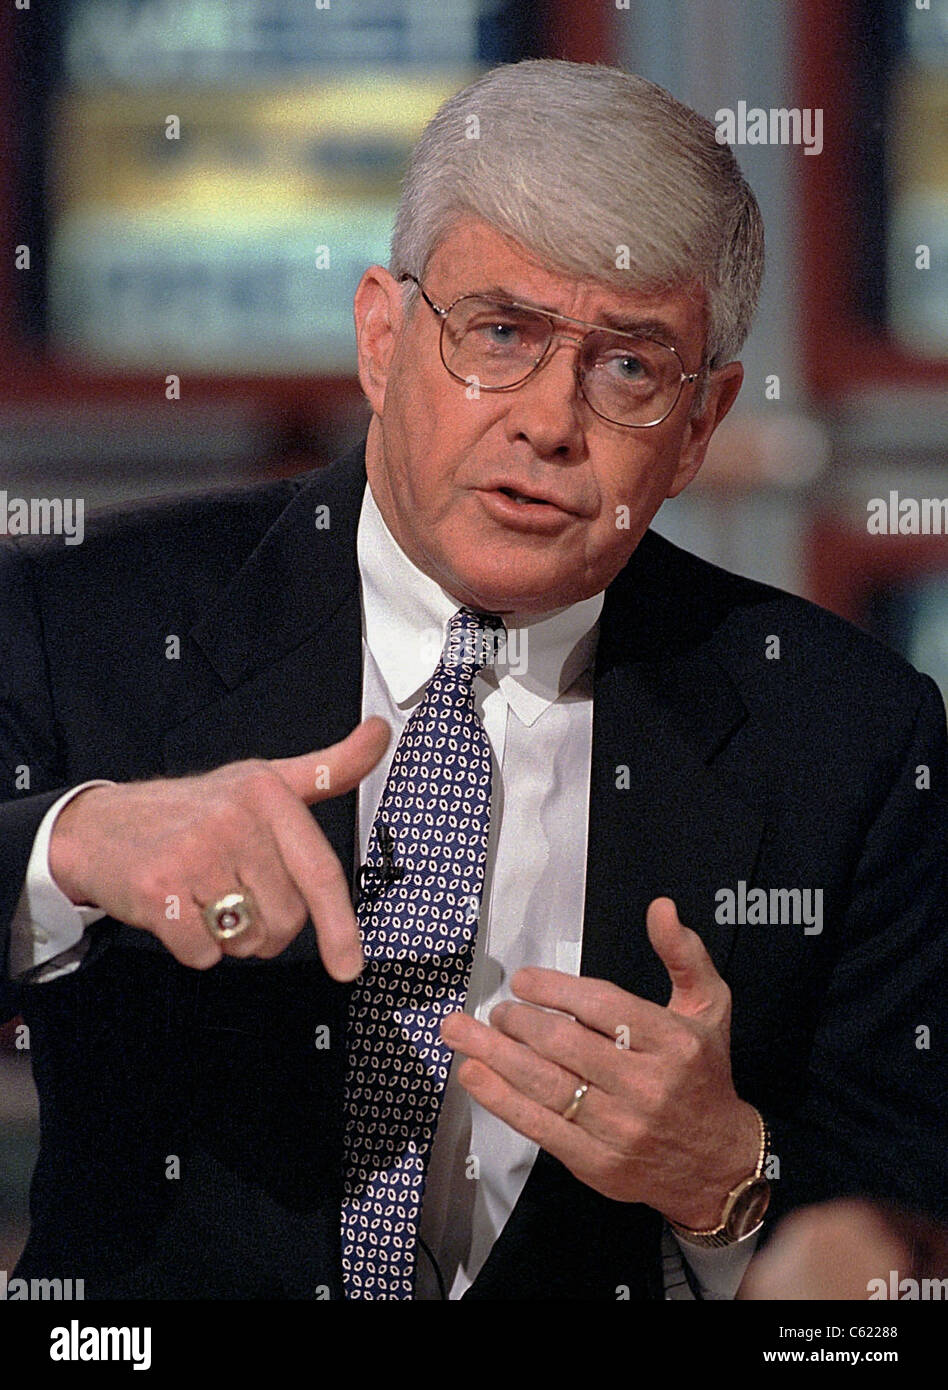 Former Republican Vice-Presidential candidate Jack Kemp on NBC's 'Meet the Press' June 8, 1997 in Washington, DC Stock Photo